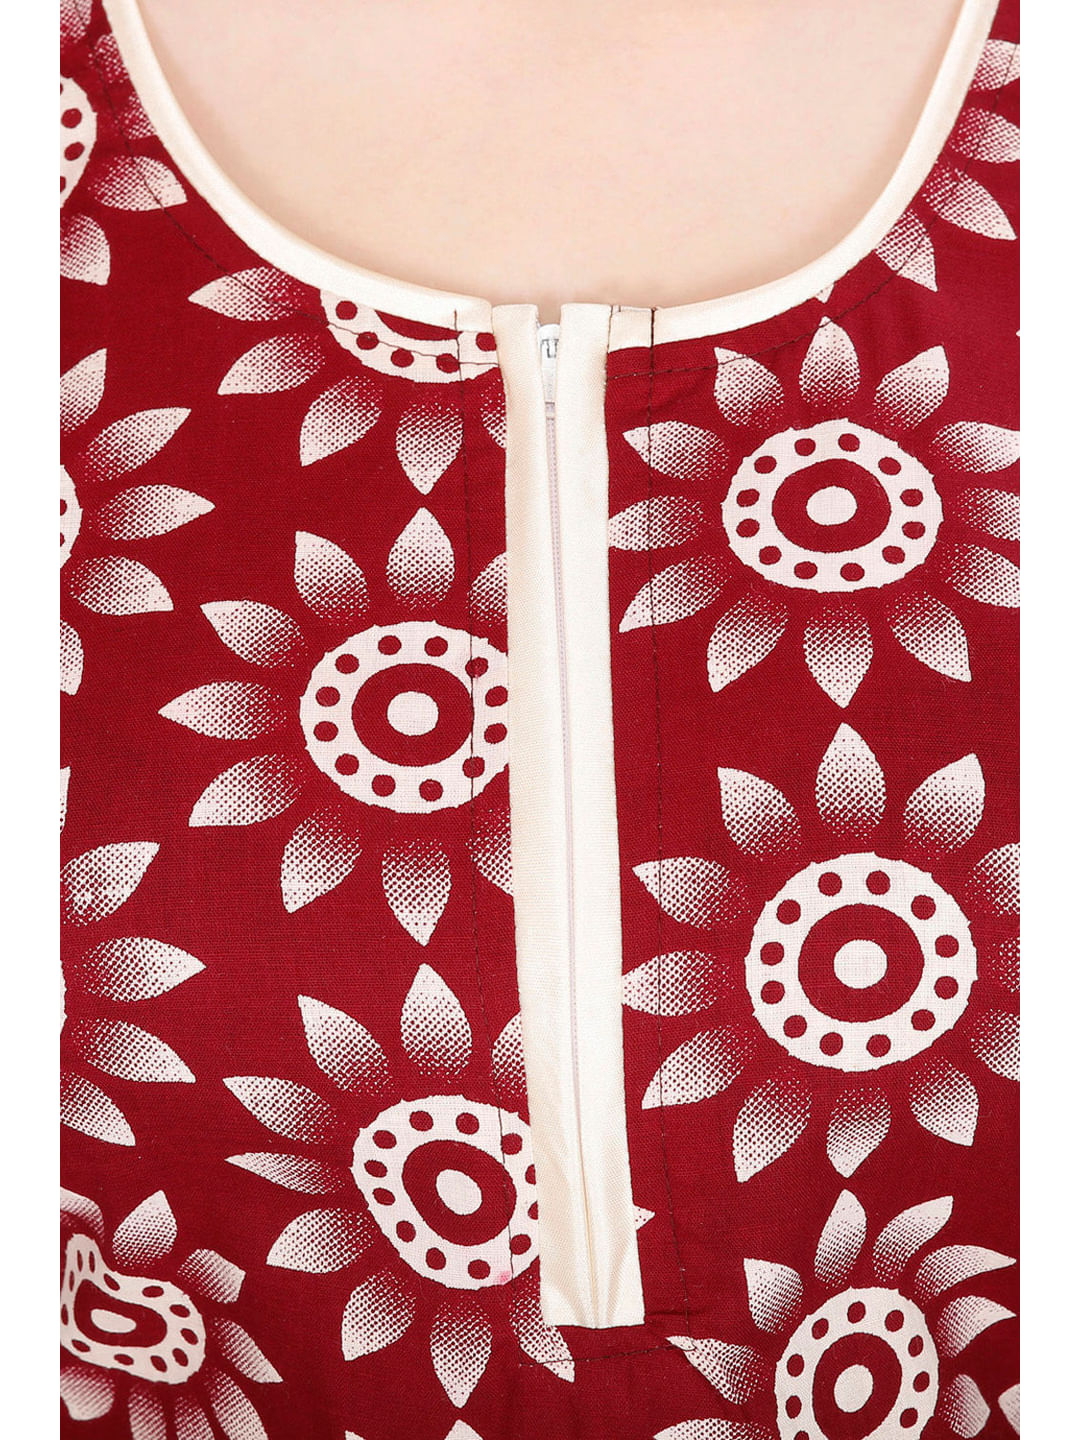 Cotton Maroon Floral Printed Nighty (Free Size)